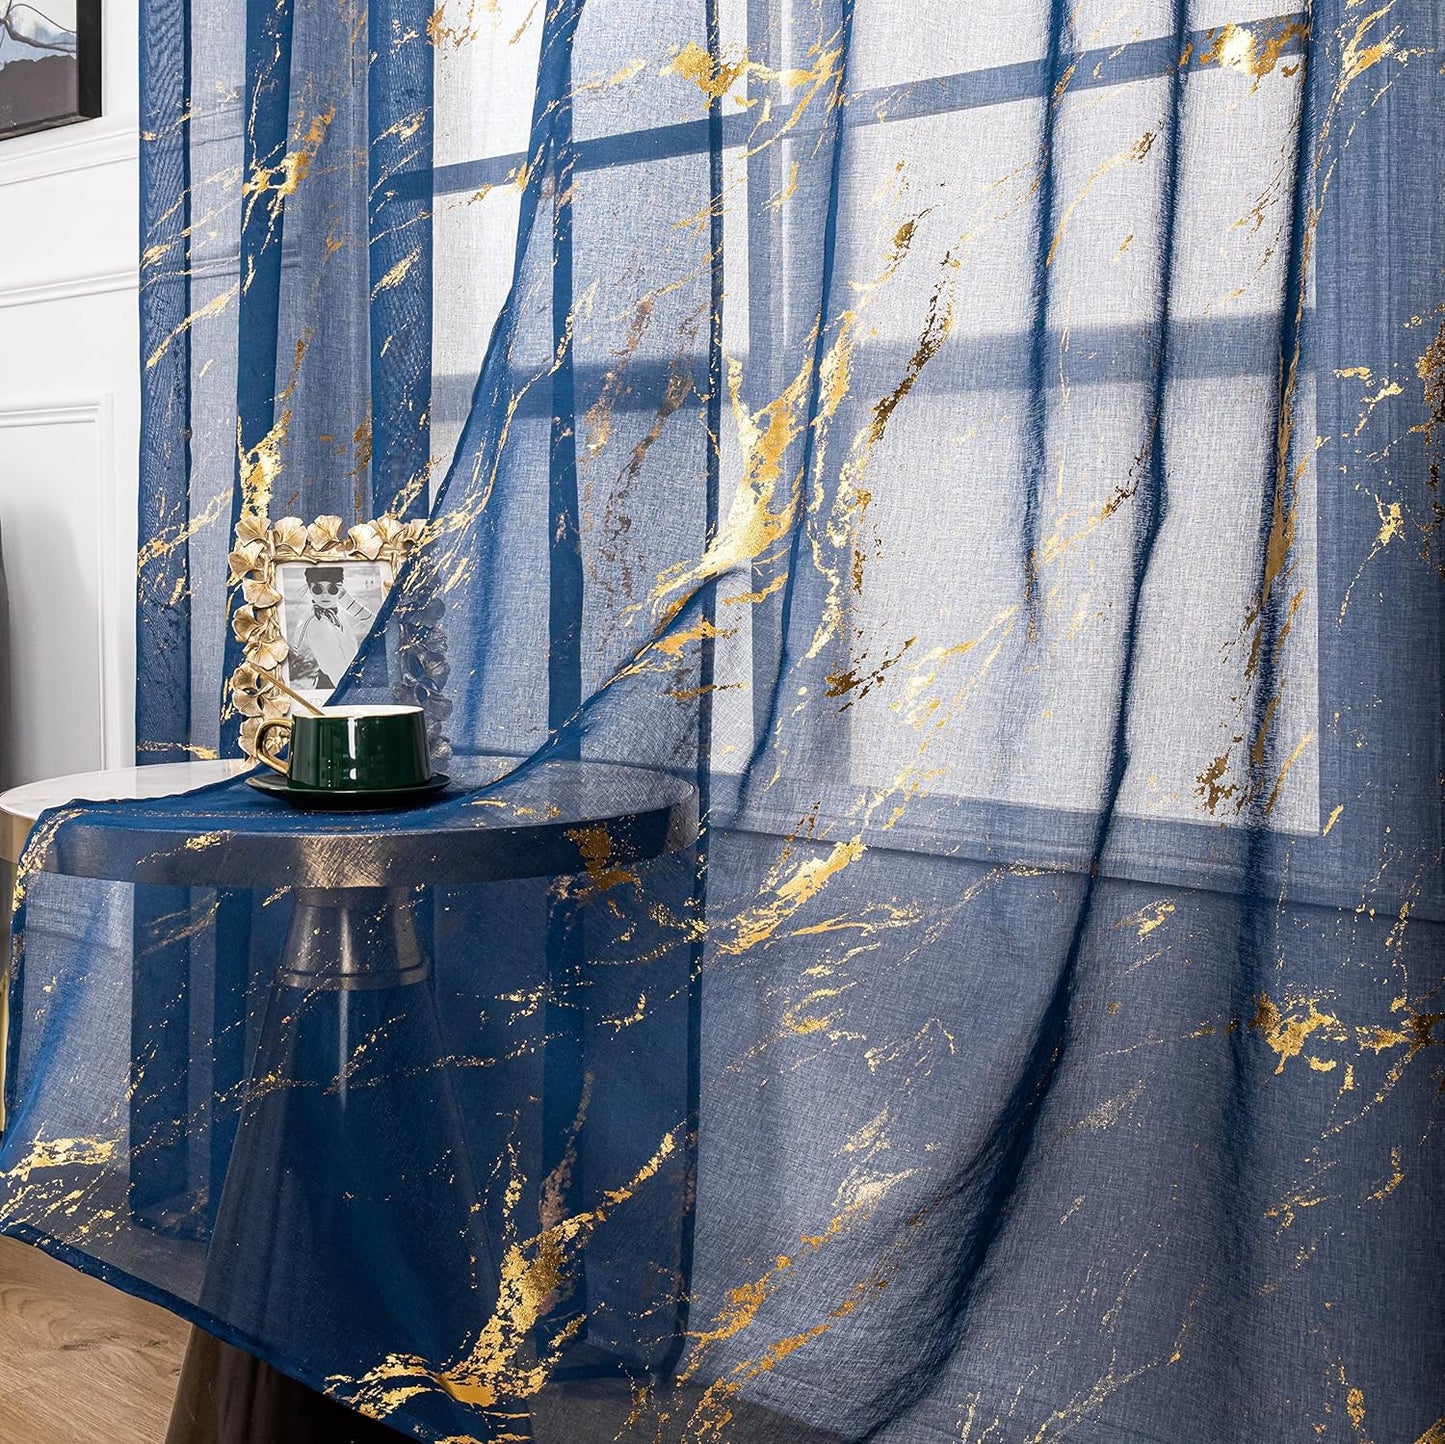 Sutuo Home Marble White Sheer Curtains 84 Inch Length, Gold Foil Print Metallic Bronzing, Privacy Window Treatment Decor Abstract Drape Pair 2 Panels Set for Bedroom Kitchen Living Room 52" W X 84" L  Sutuo Home Gold And Navy Blue 52" W X 96" L, 2 Panels 